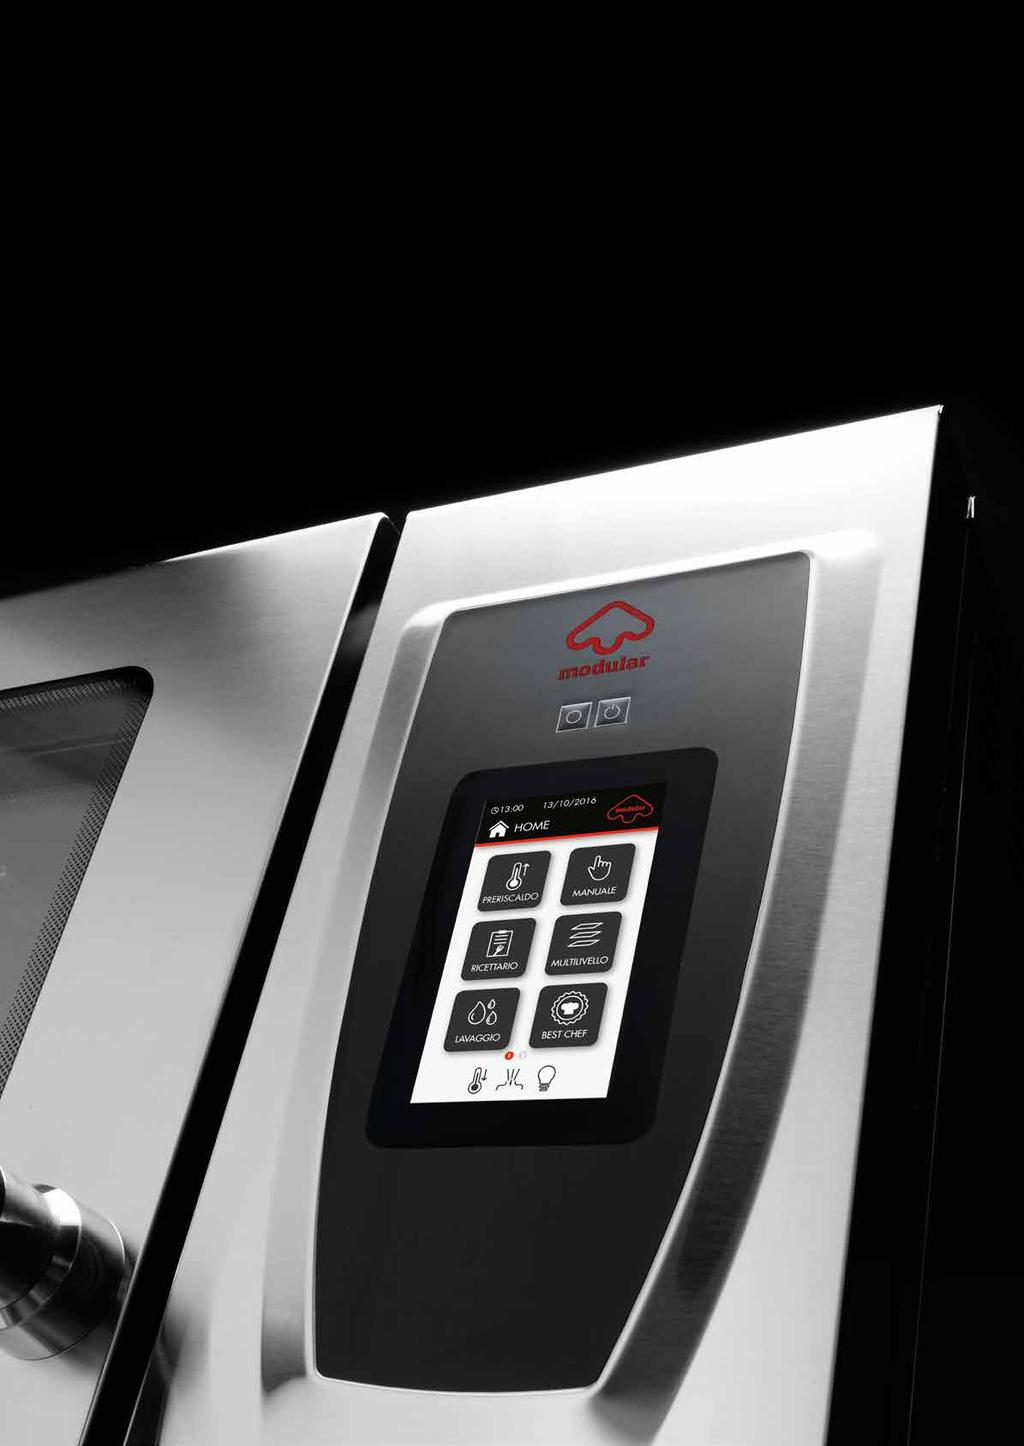 modular ovens >emotion high performance, technology, heavy duty it's not just cooking pratika professional, easy, simple, adaptable function space-saving, user-friendly Commandes simples et